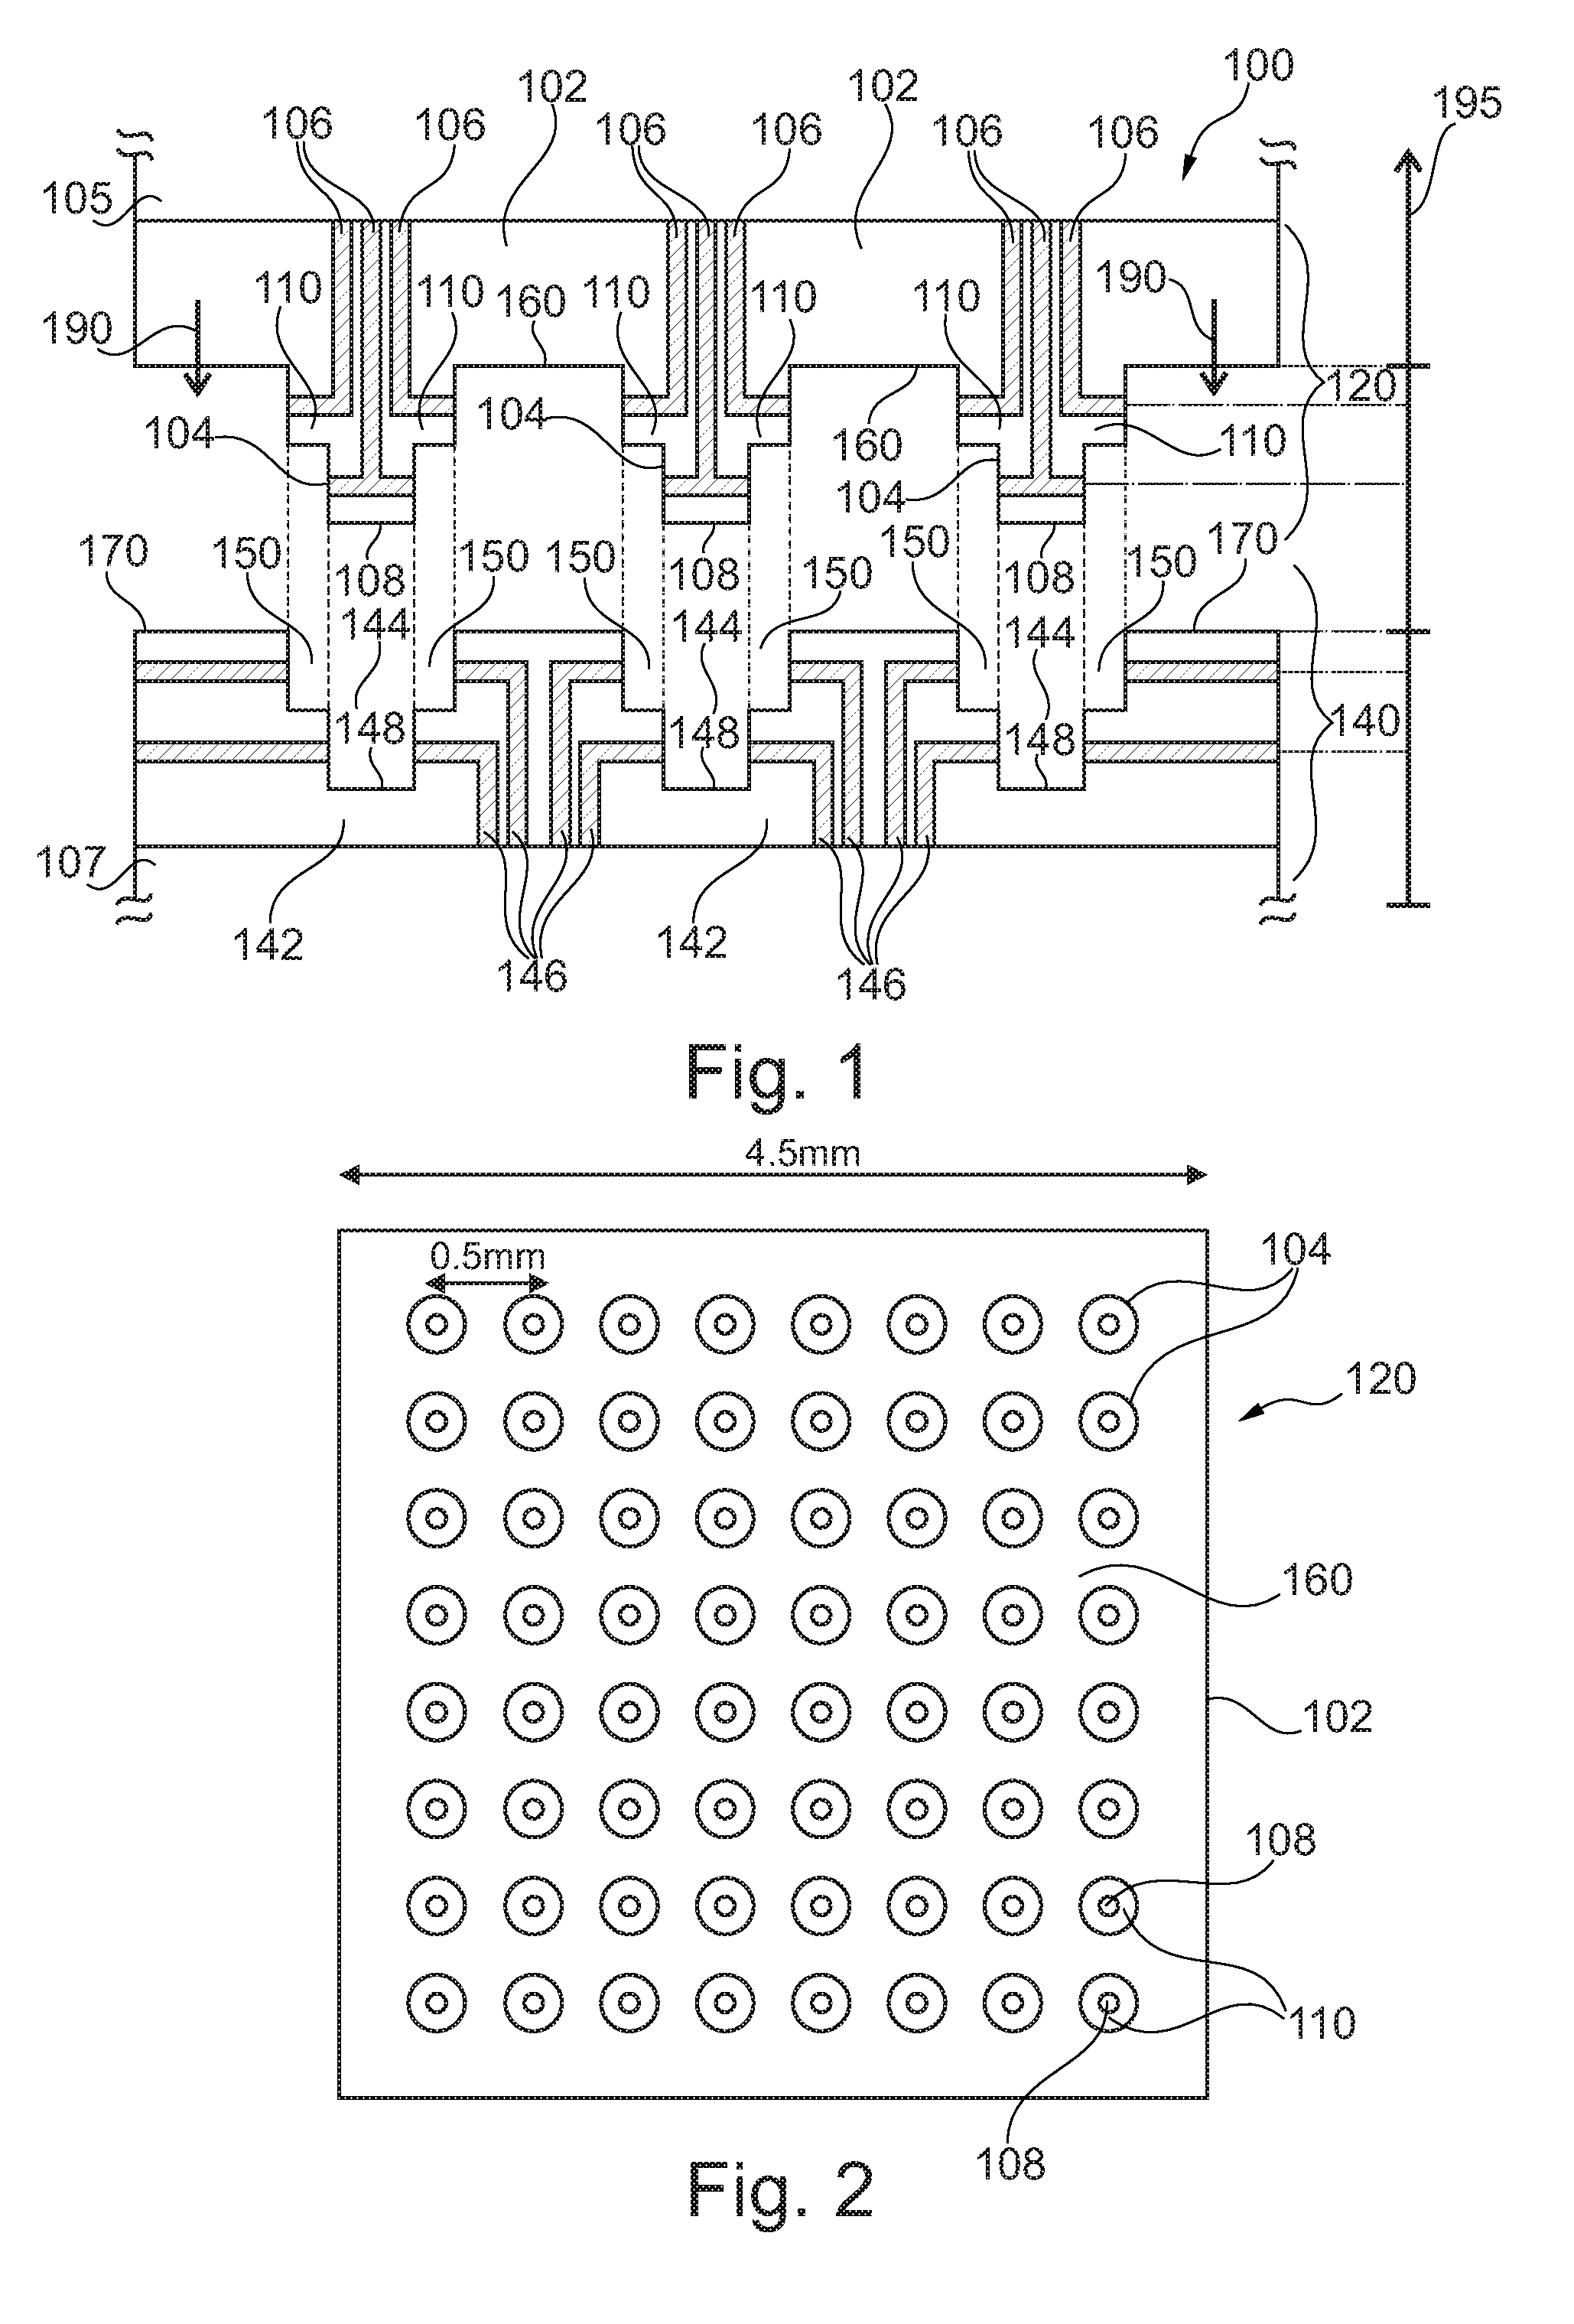 Multilevel interconnection system